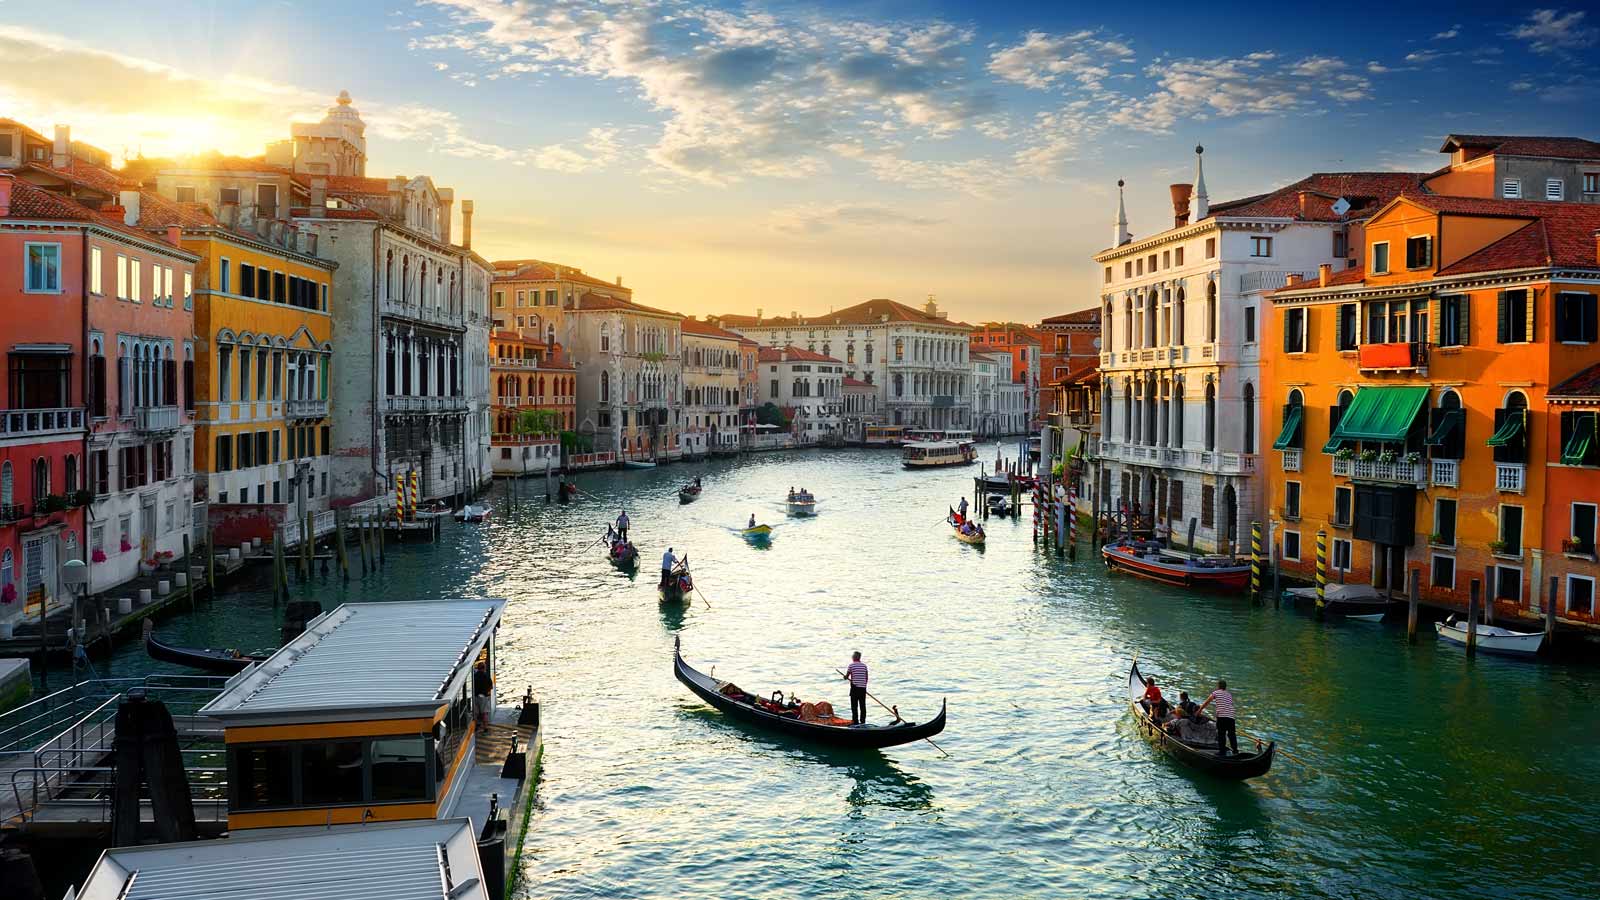 Australian Tourists Fined $4,000 For ‘Skurfing’ Through Venice